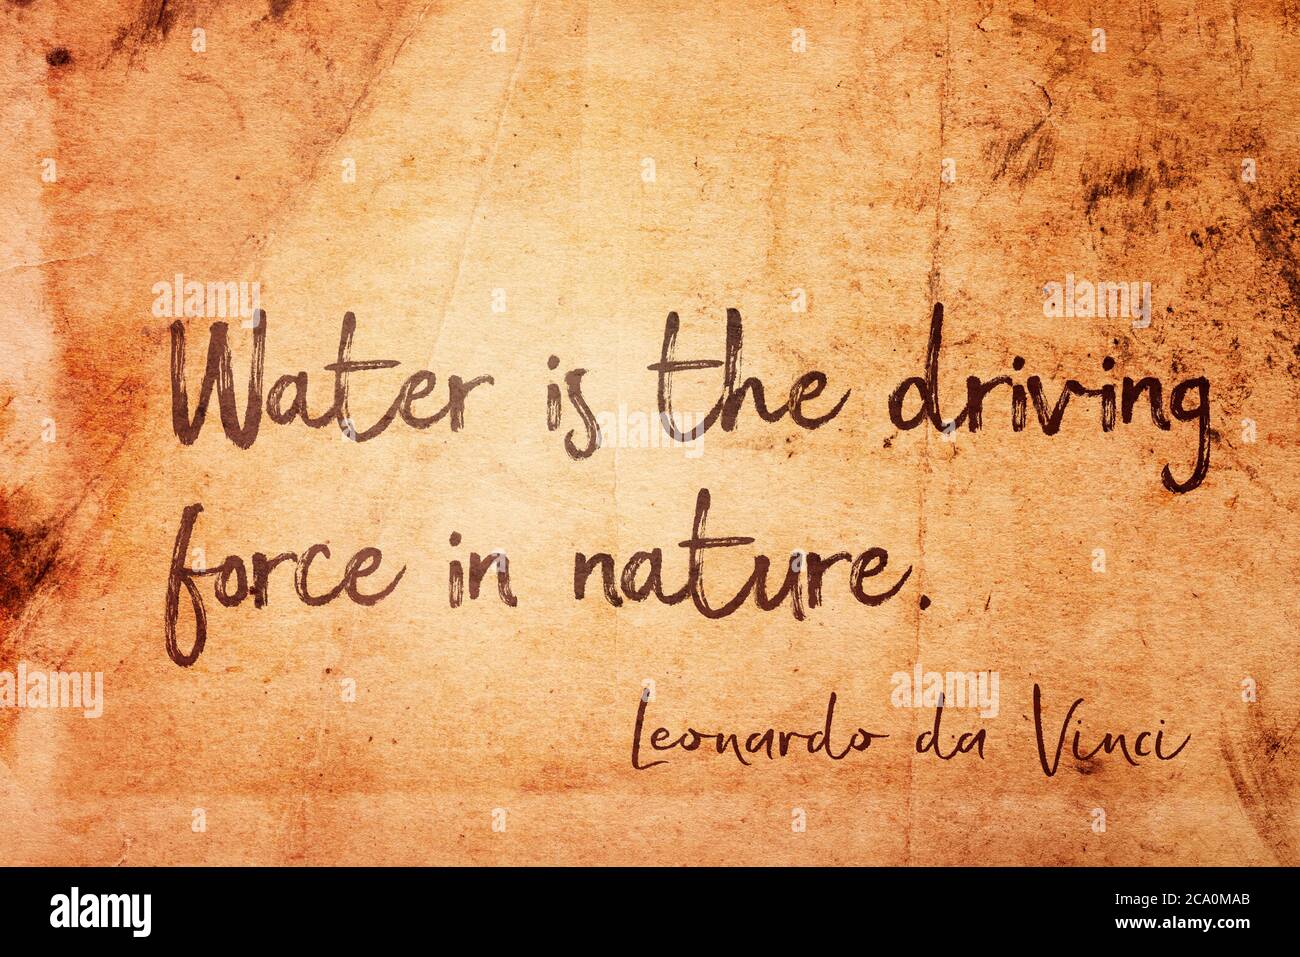 Water is the driving force in nature - ancient Italian artist Leonardo da Vinci quote printed on vintage grunge paper Stock Photo